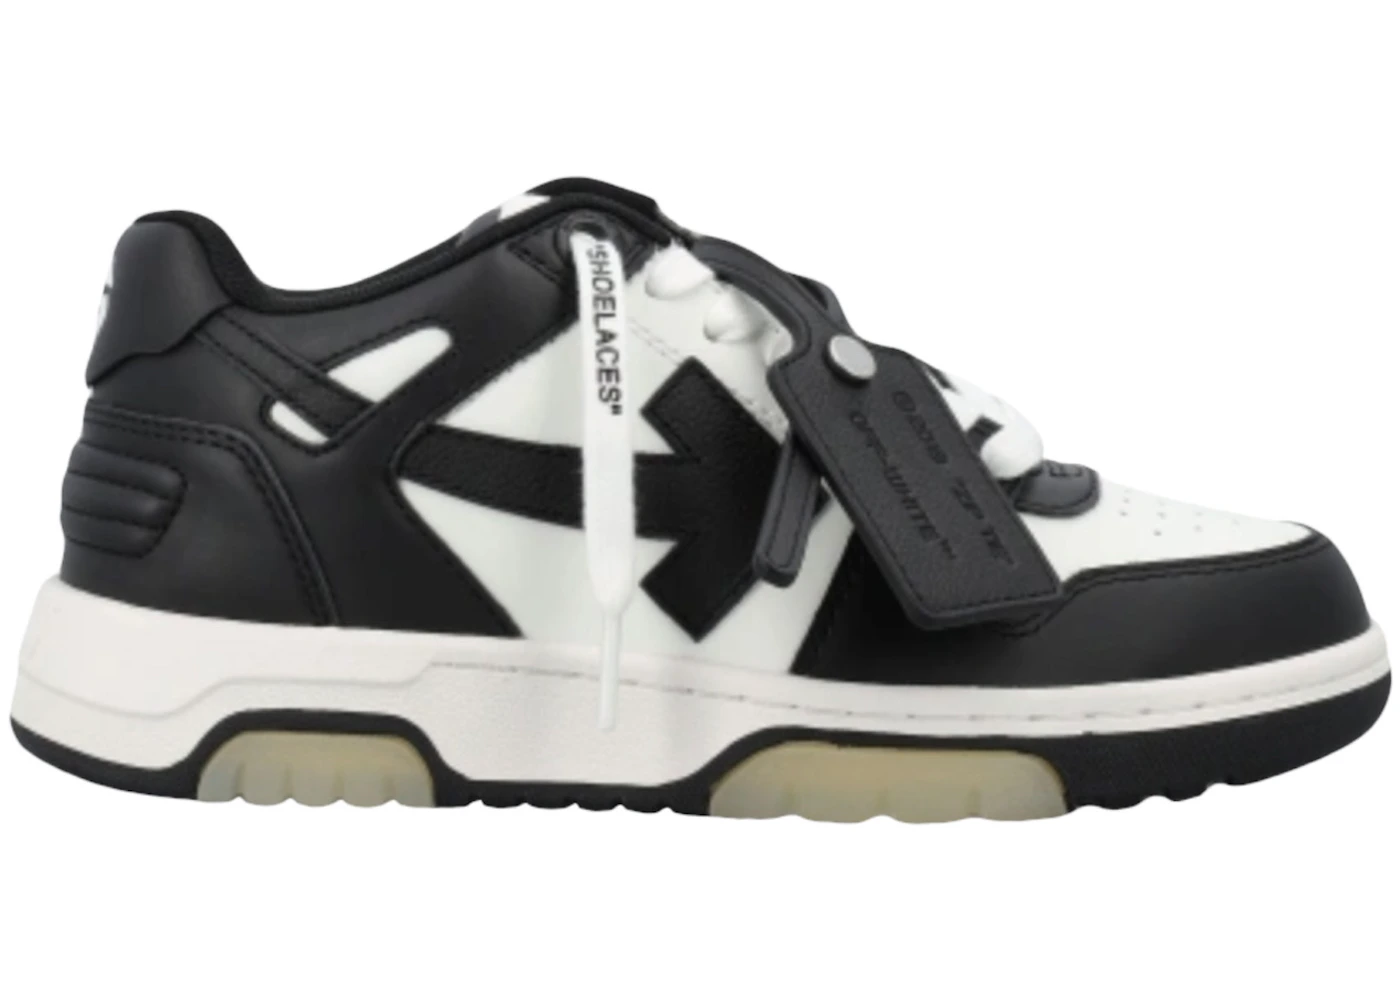 OFF-WHITE Out Of Office "OOO" Low Black White (Women's)